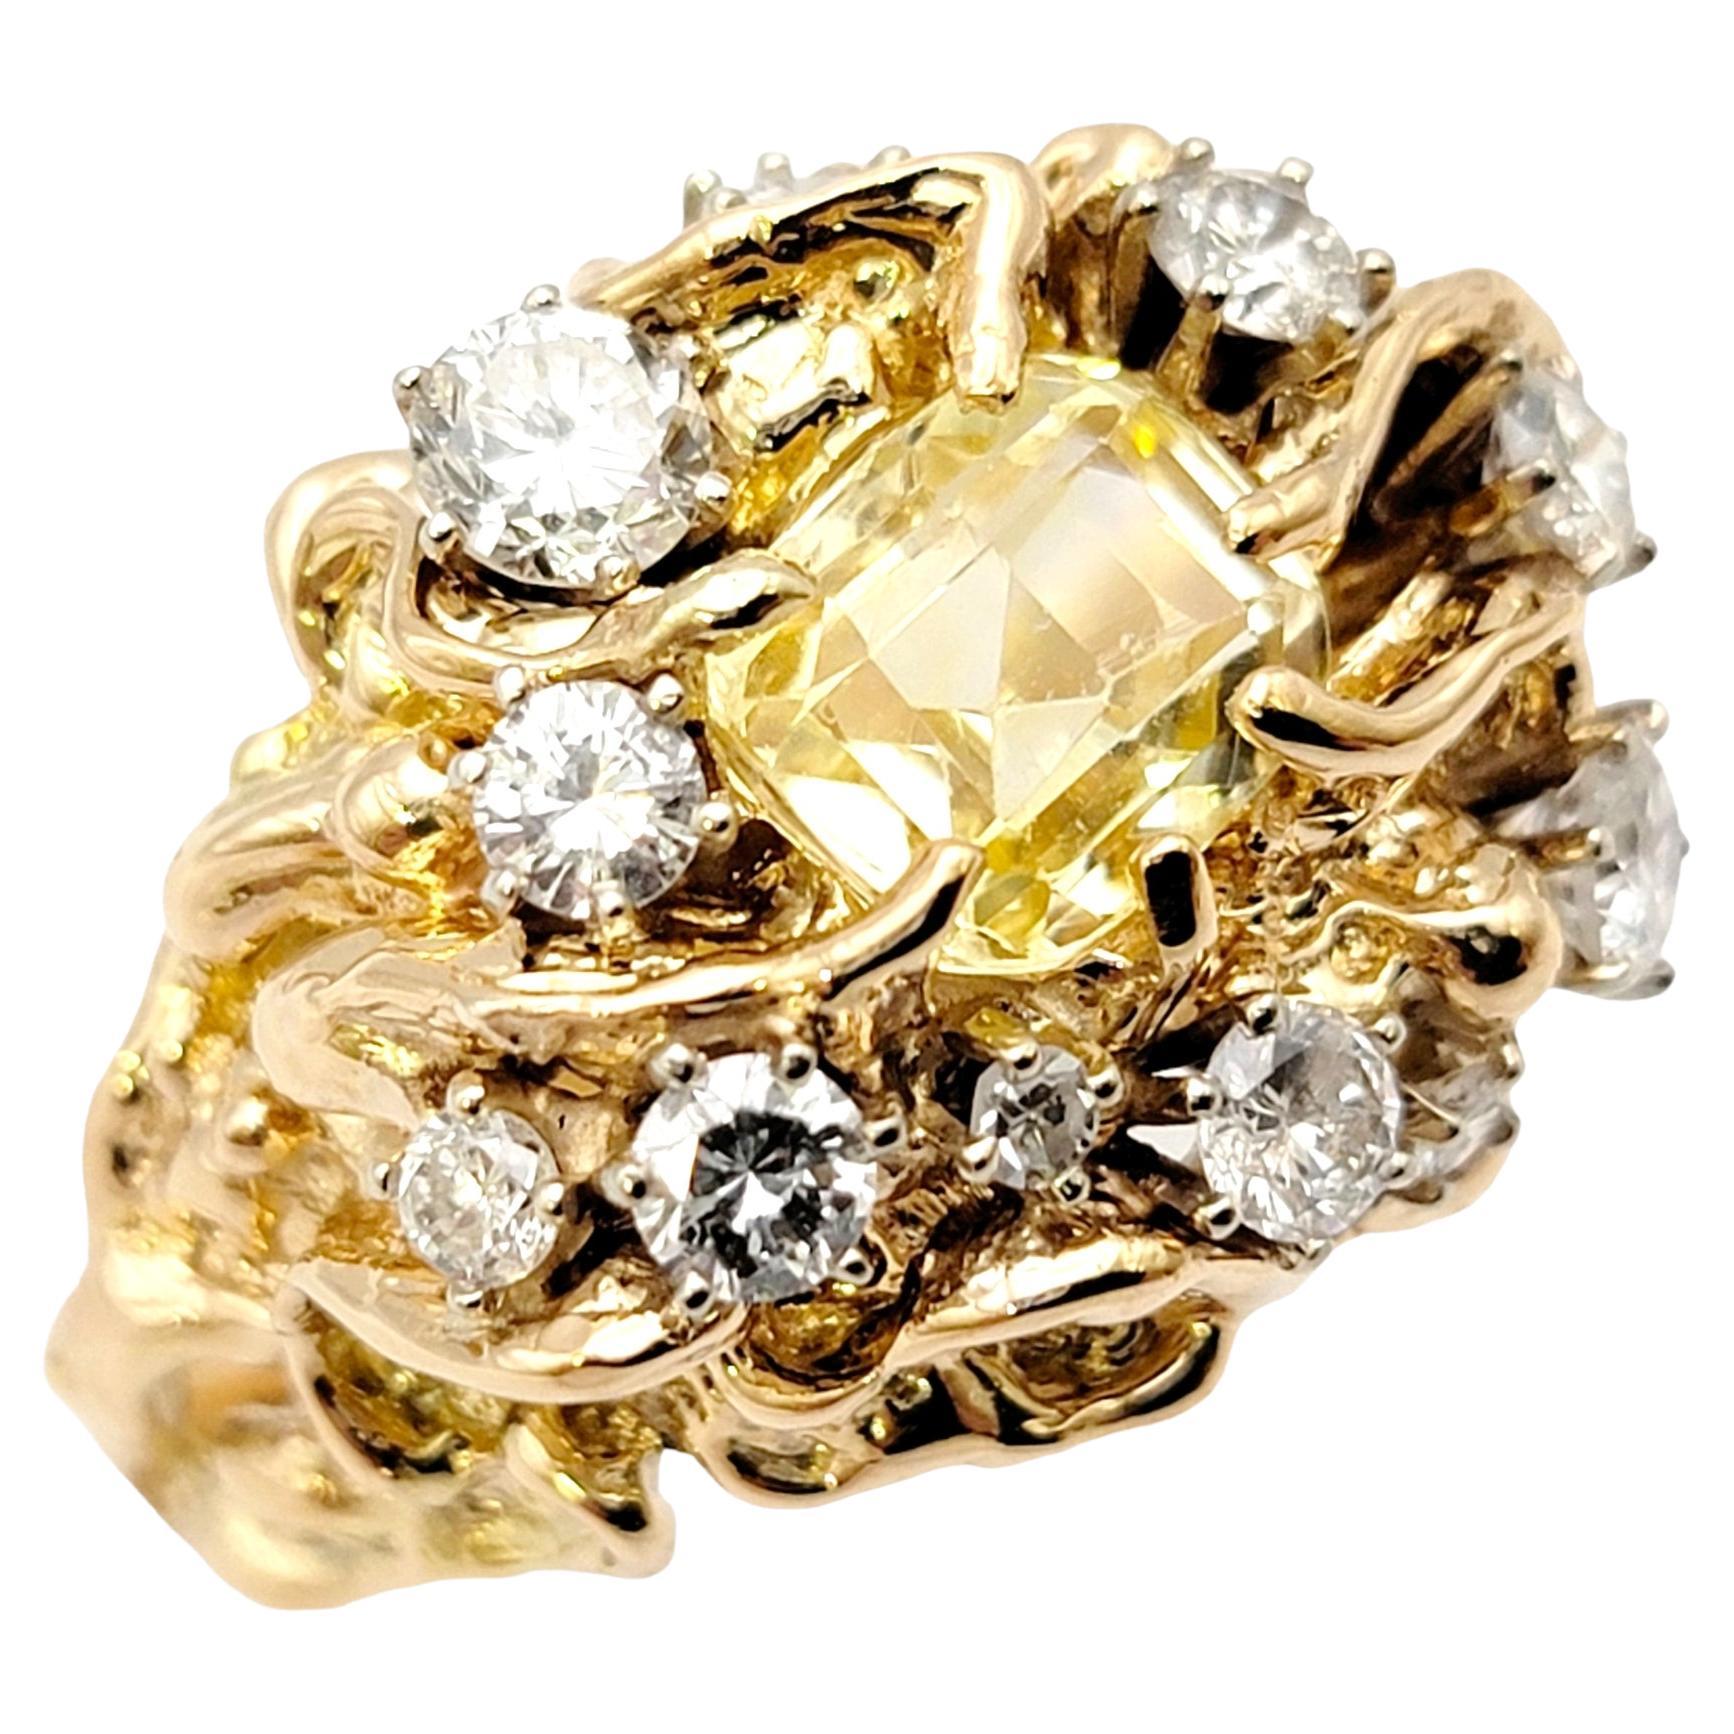 Ring size: 8.75

Shown here is an absolutely fabulous gold cocktail ring bursting with sparkle! The unique design fills the finger from edge to edge with massive shine. 

This stunning ring features a single 2.83 carat radiant cut light yellow